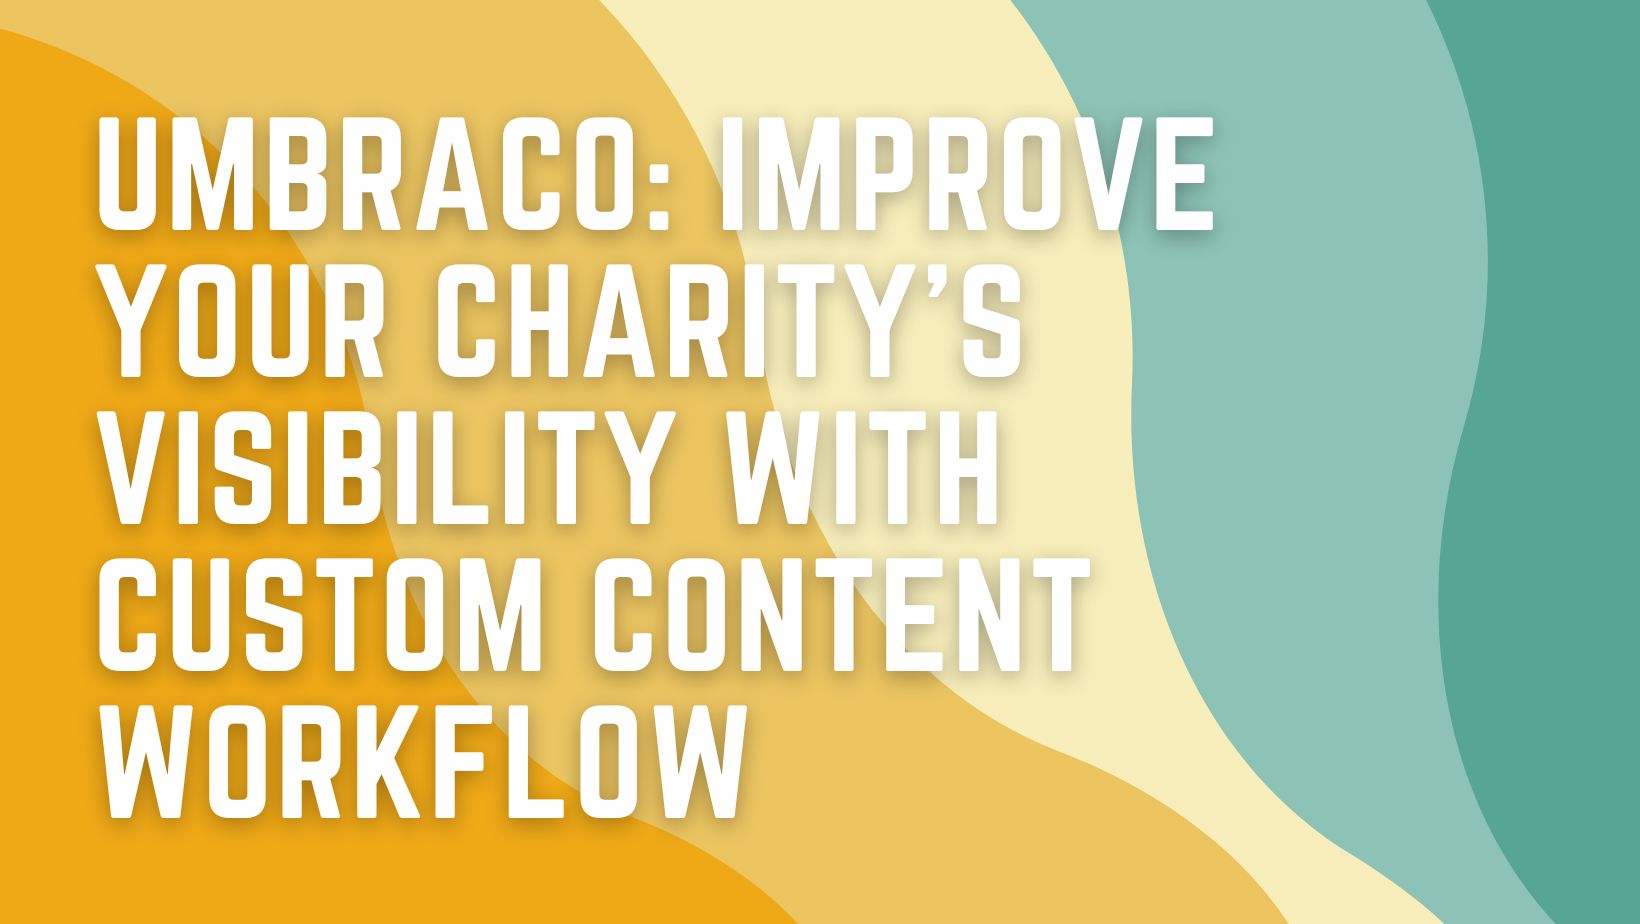 Umbraco: Improve Your Charity Website's Visibility With Custom Content Workflow